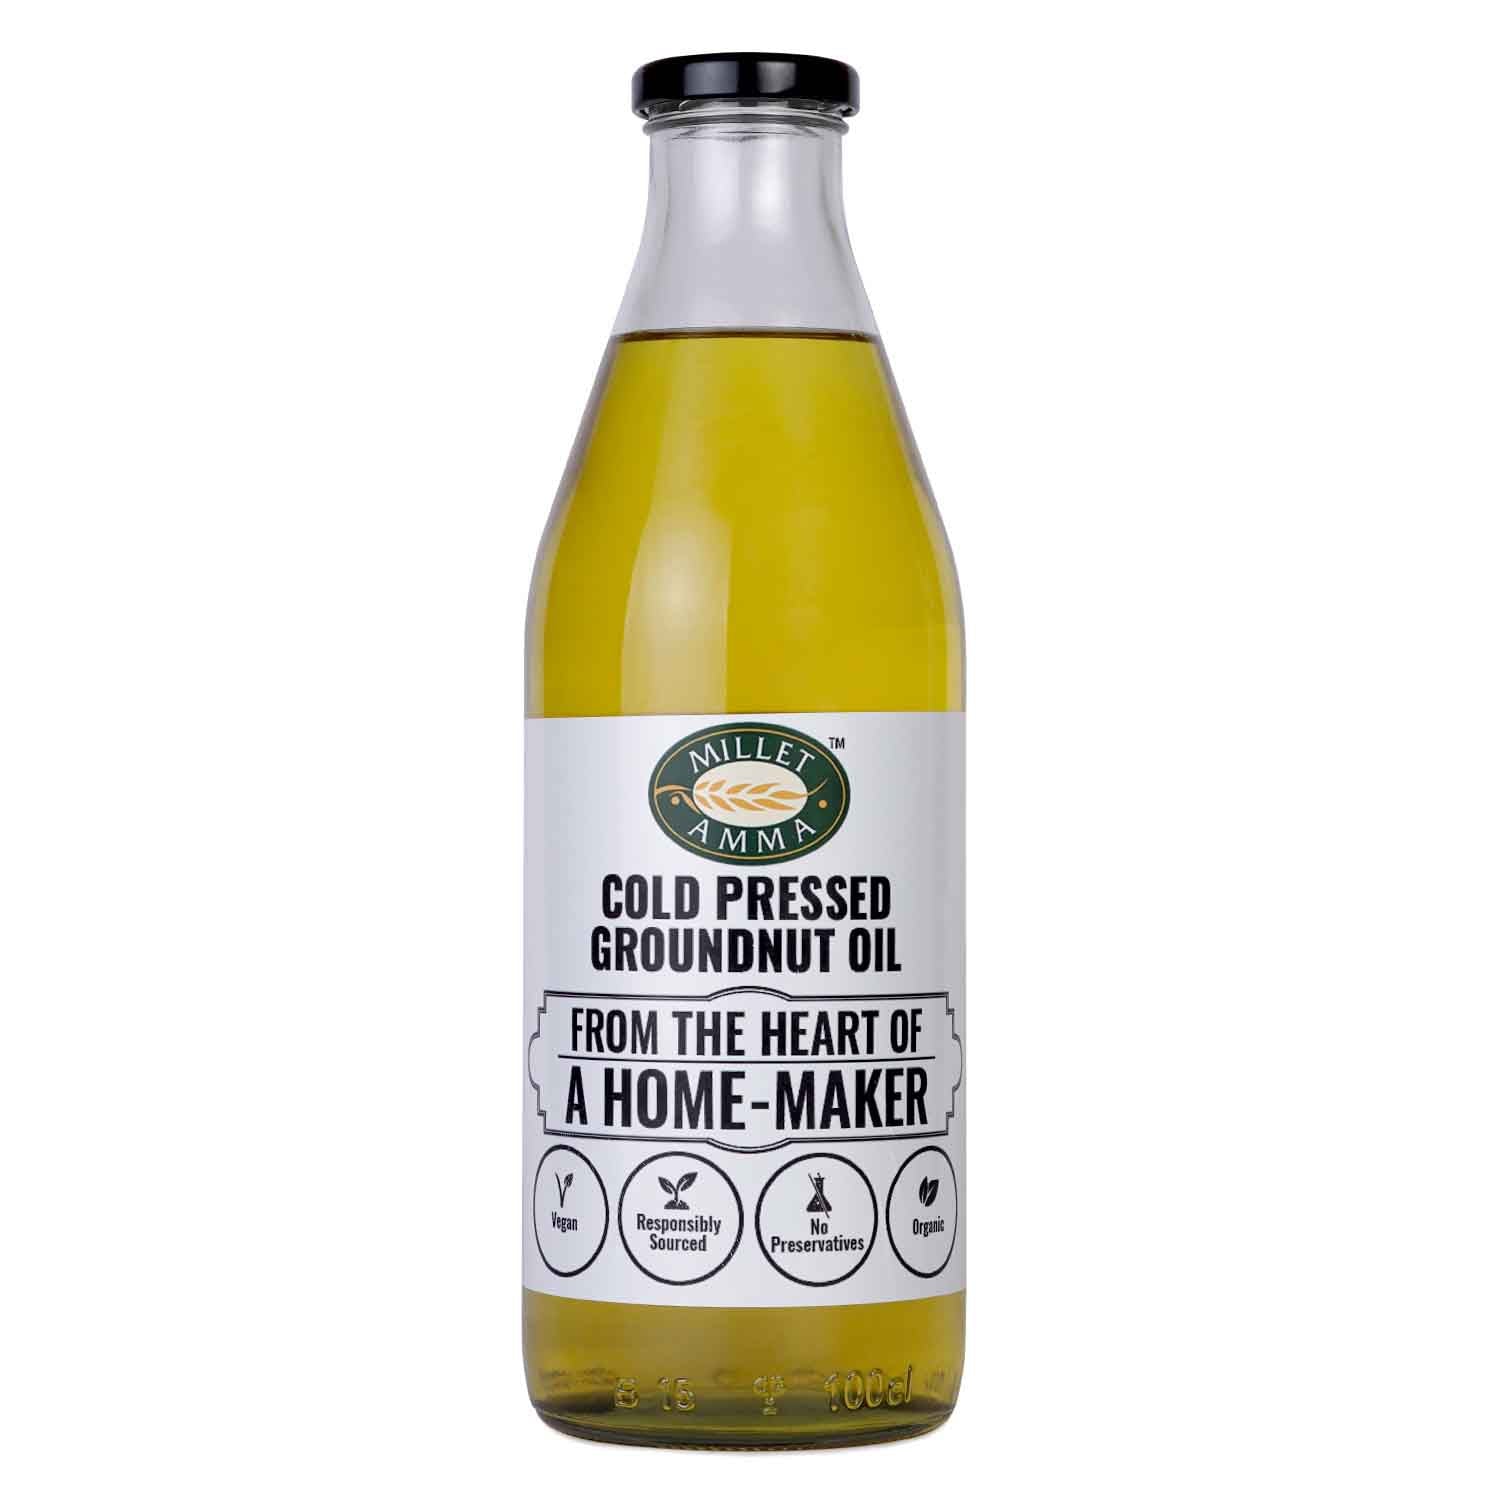 Milletamma’s cold pressed groundnut oil is the obtained from the Organic groundnuts which contains phytosterols. The phytosterols compounds helps to reduce the cholesterol level and promote excretion.  It contains anti-oxidants which are good for skin and prevent cancer.  It is used as laxative helping in smooth bowel movement.